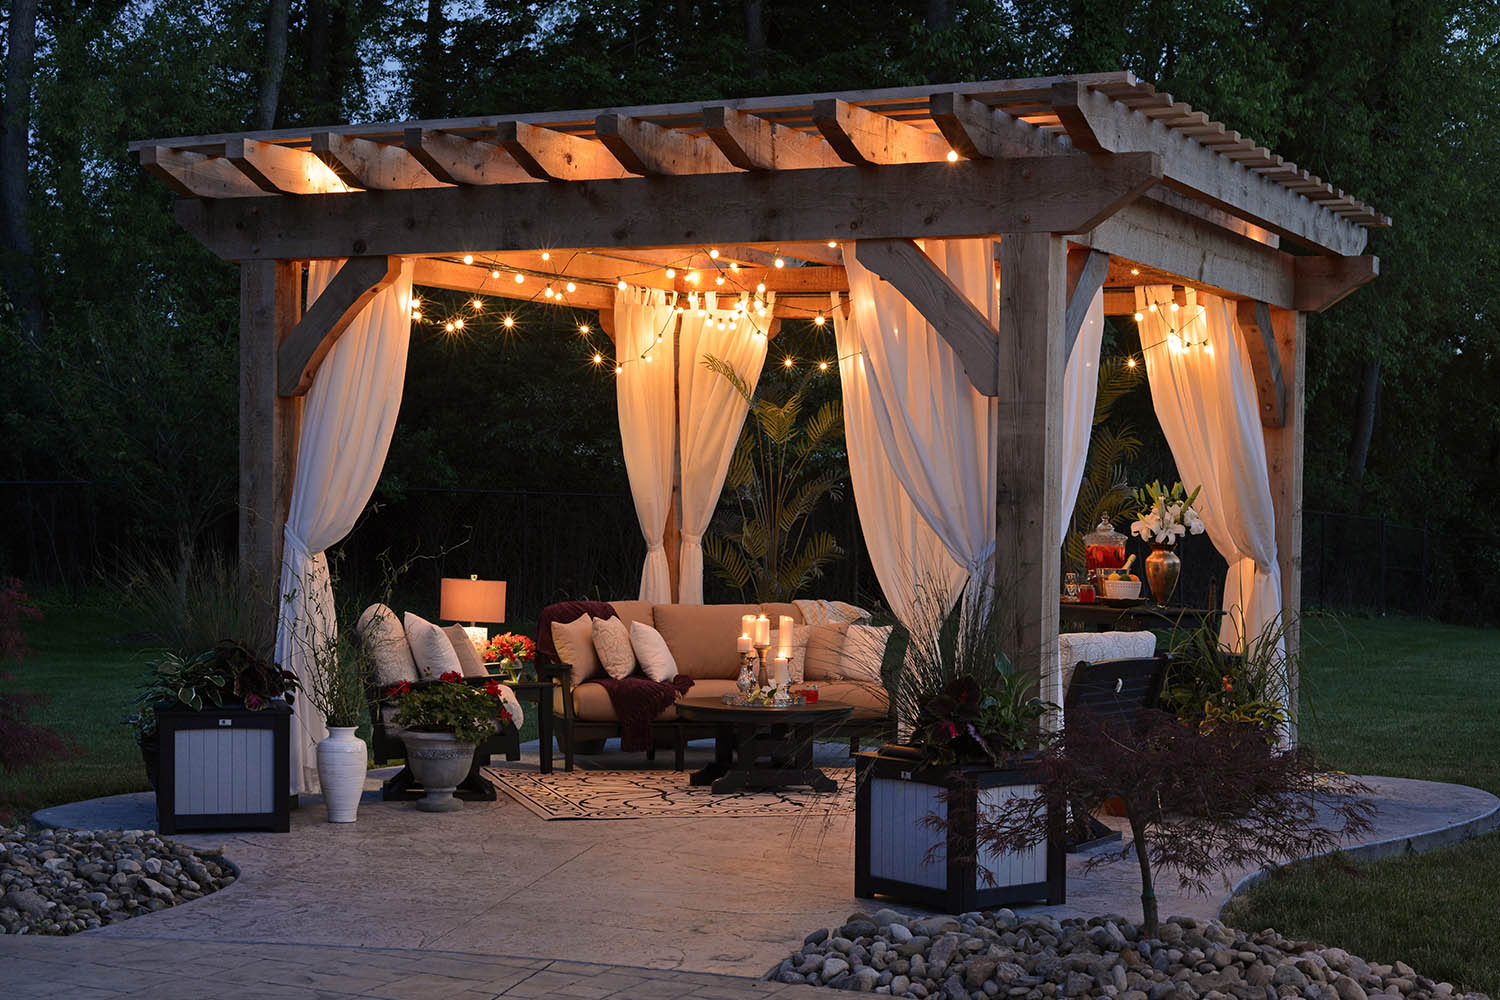 How to make your patio look expensive - tricks to get a luxe look on a budget